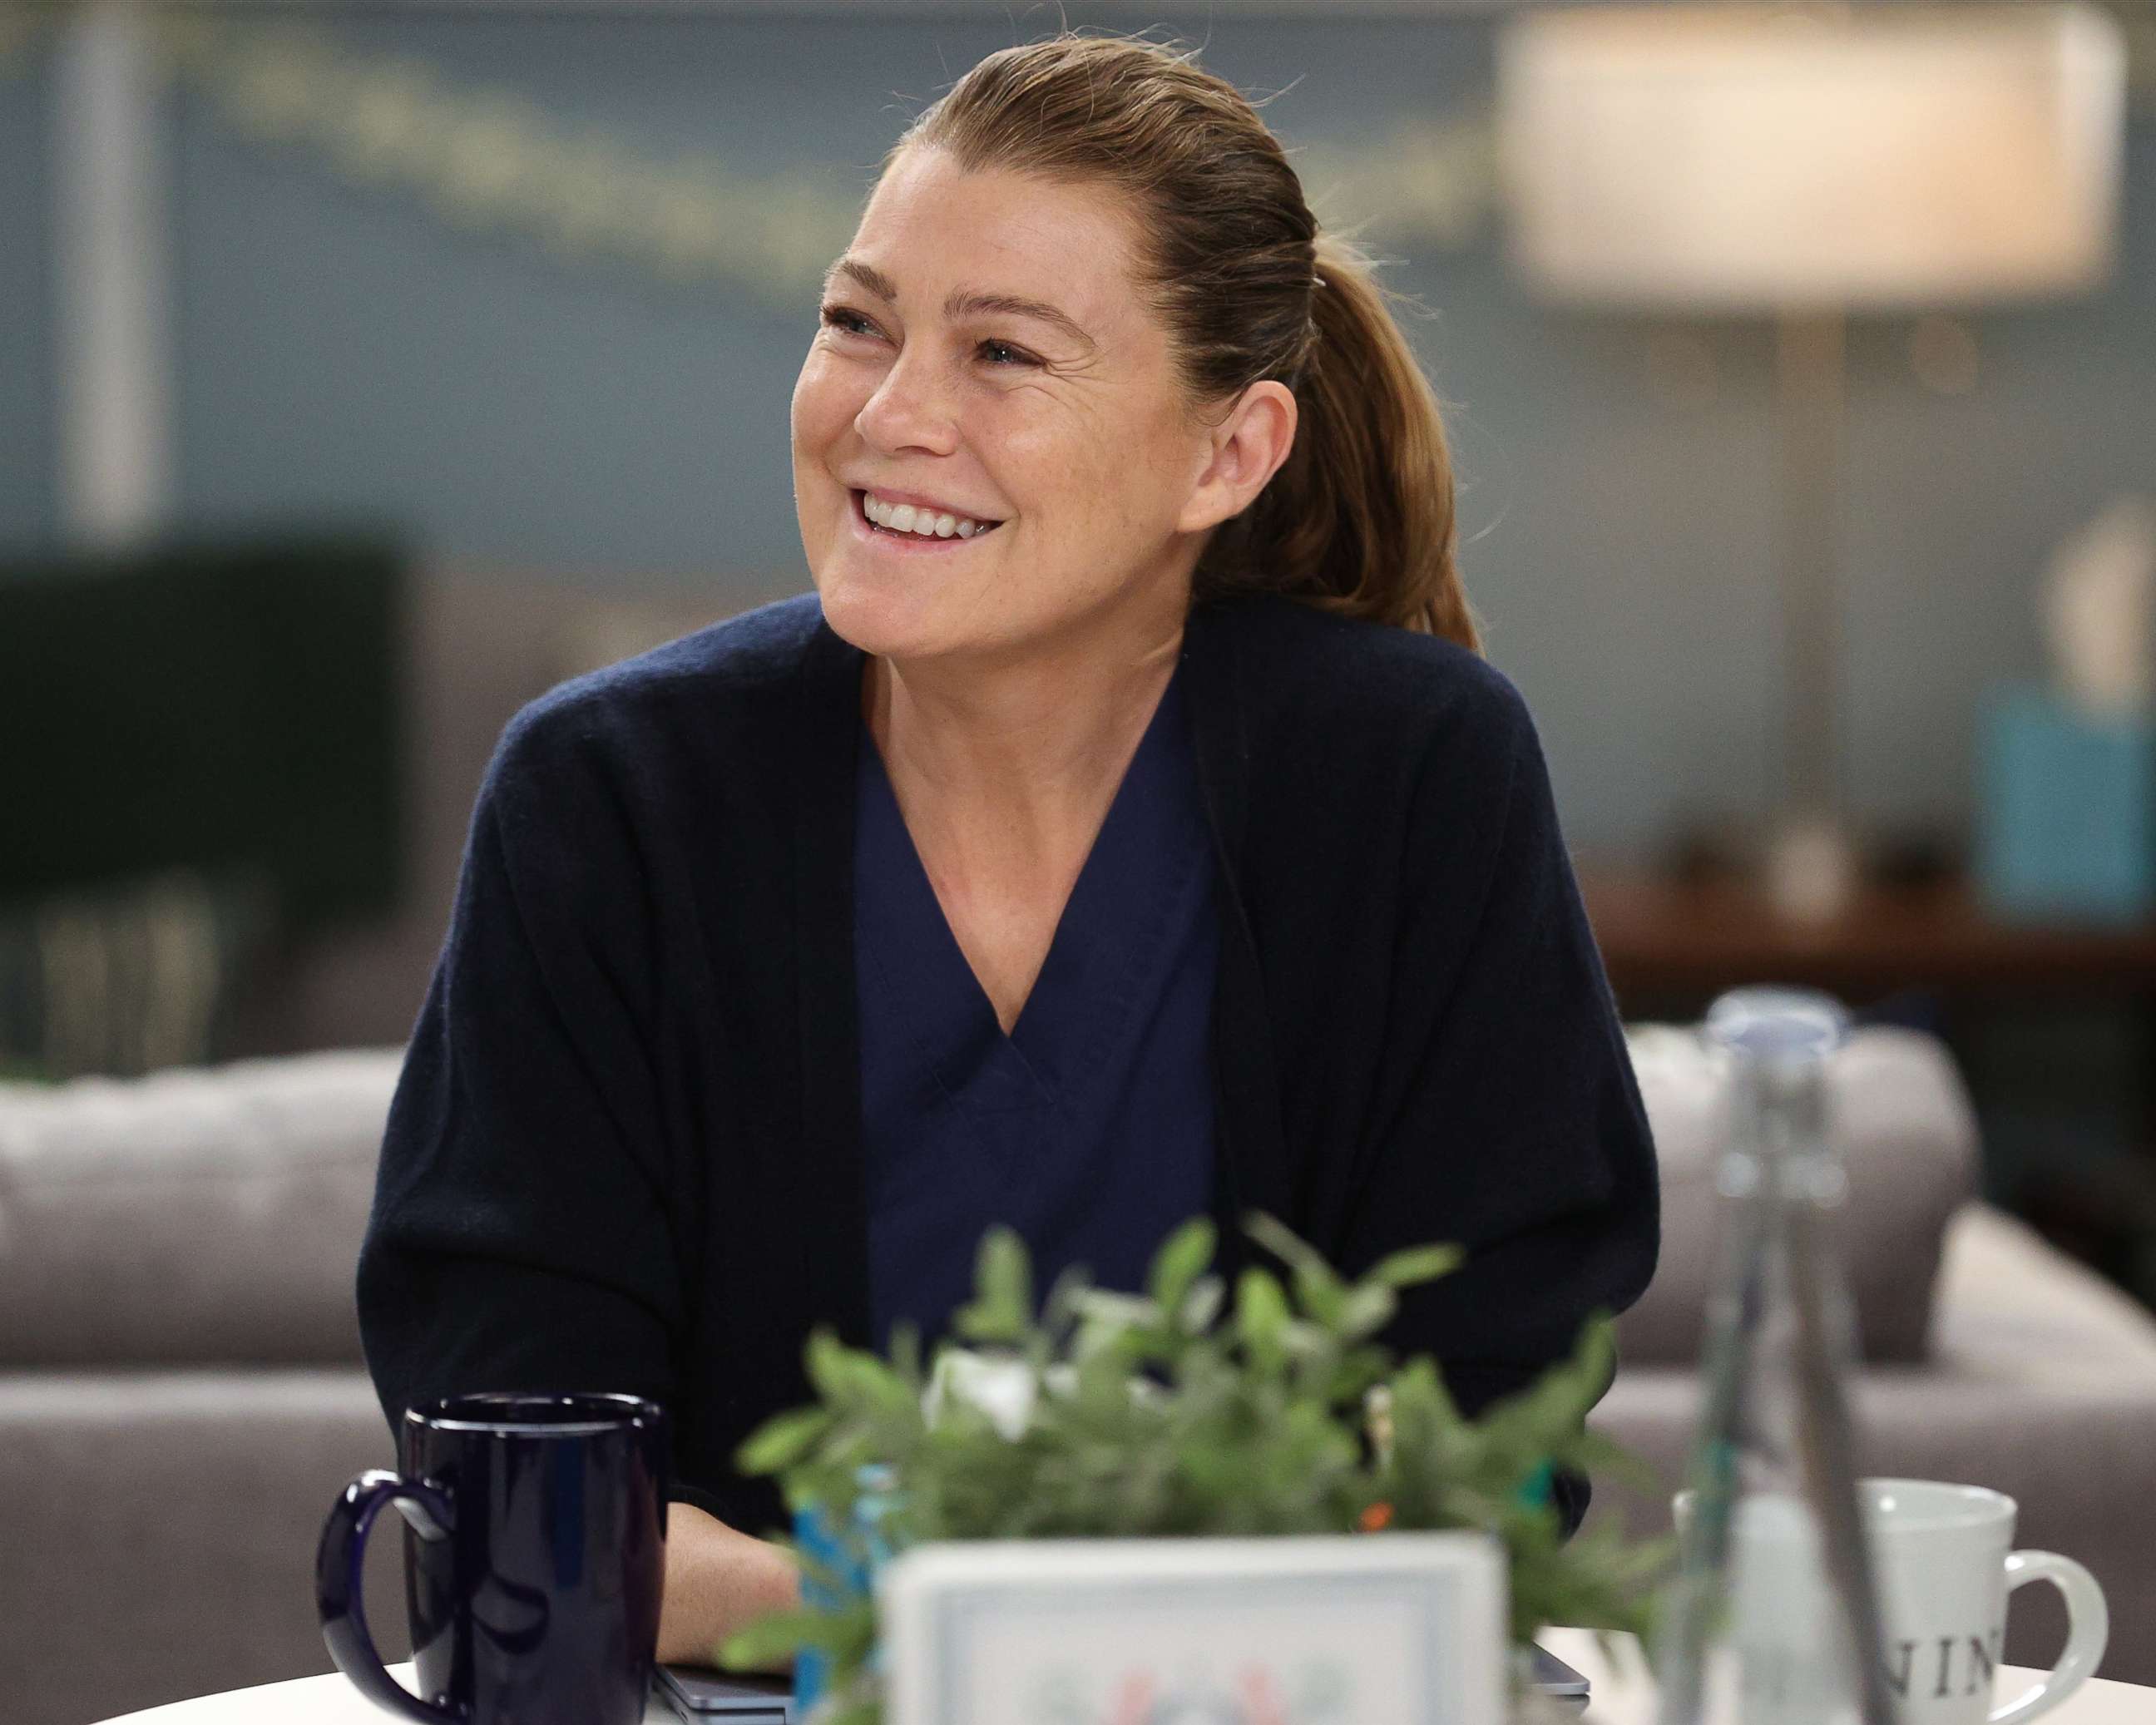 PHOTO: Ellen Pompeo as Meredith Grey in a scene from "Grey's Anatomy."